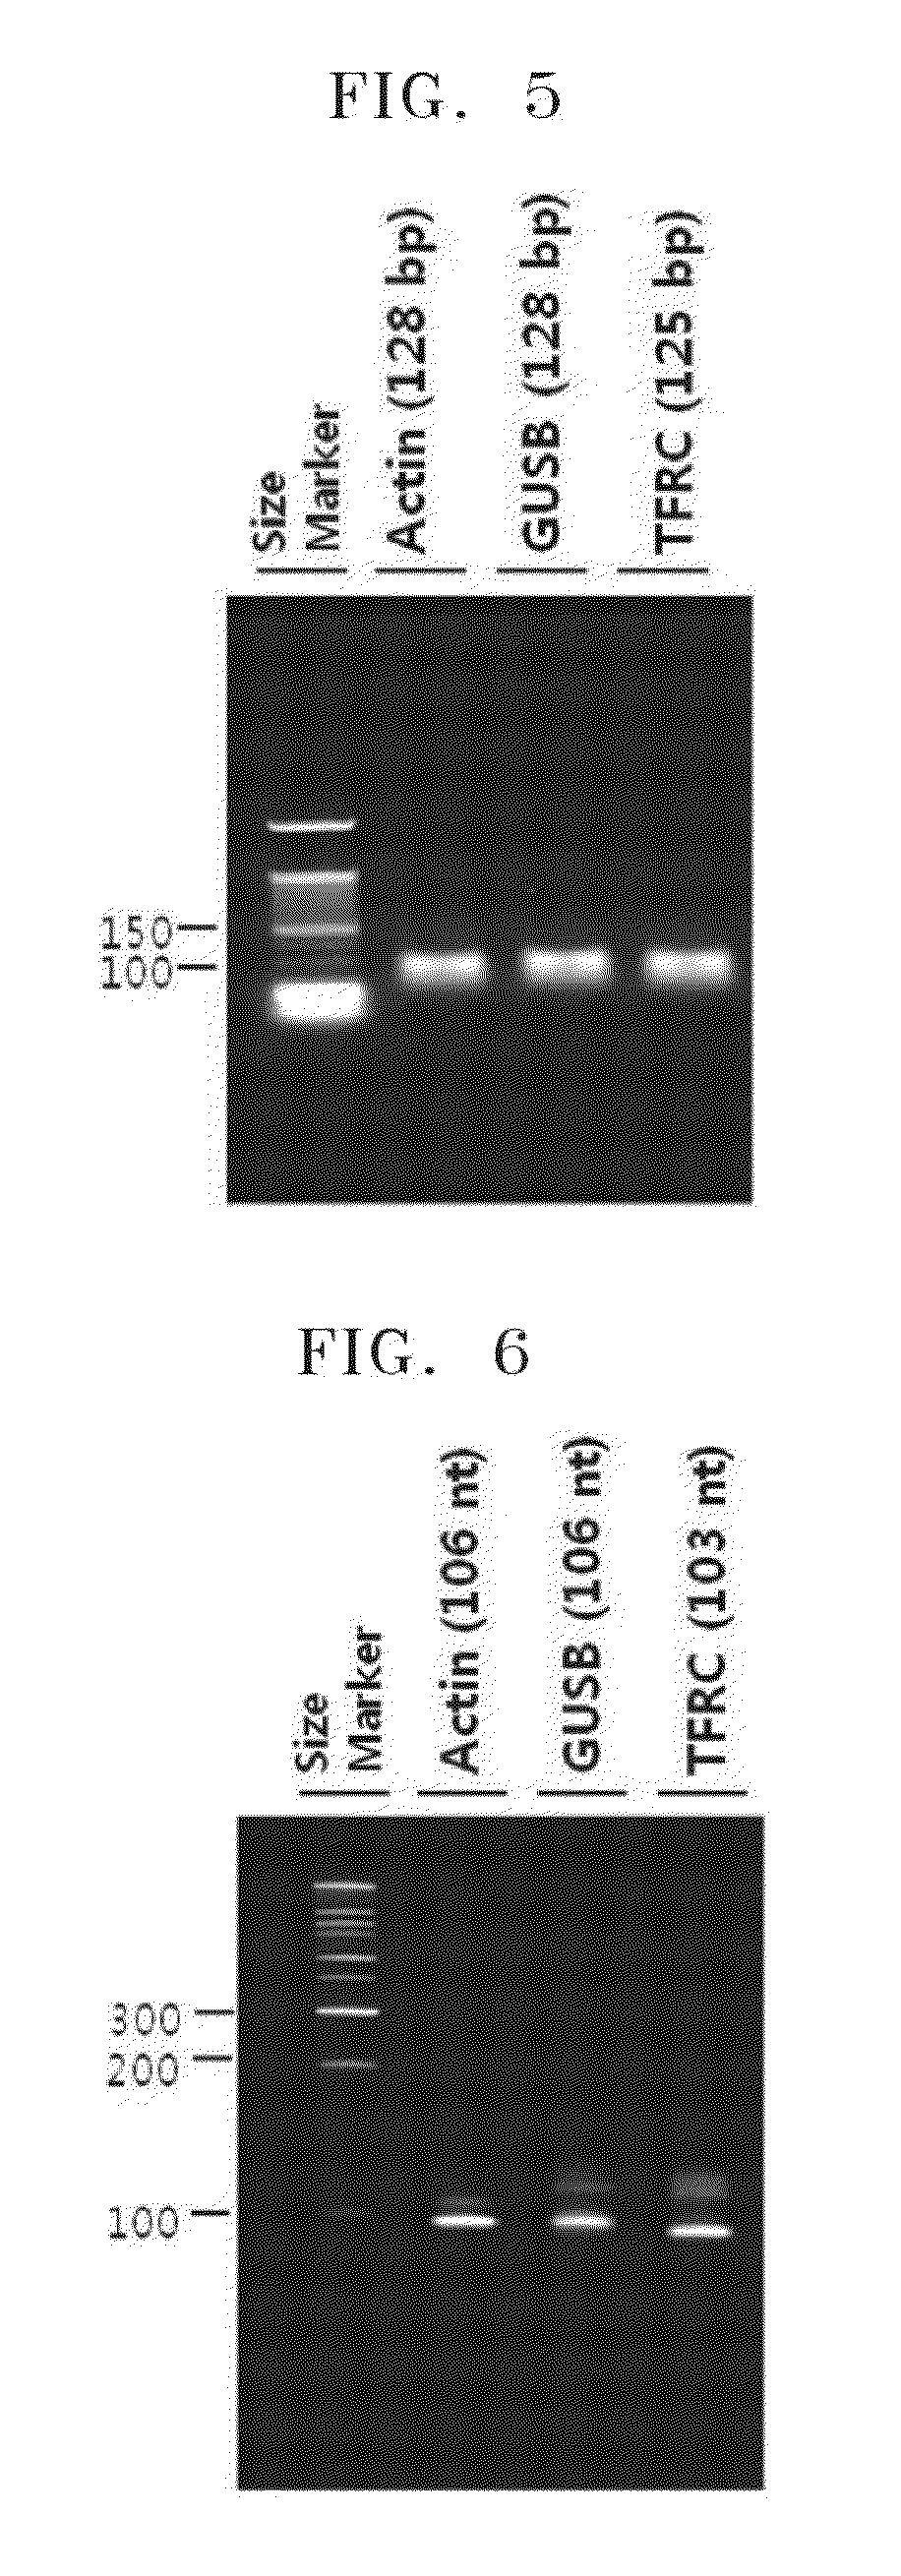 Method of determining a ratio of RNA species in a sample